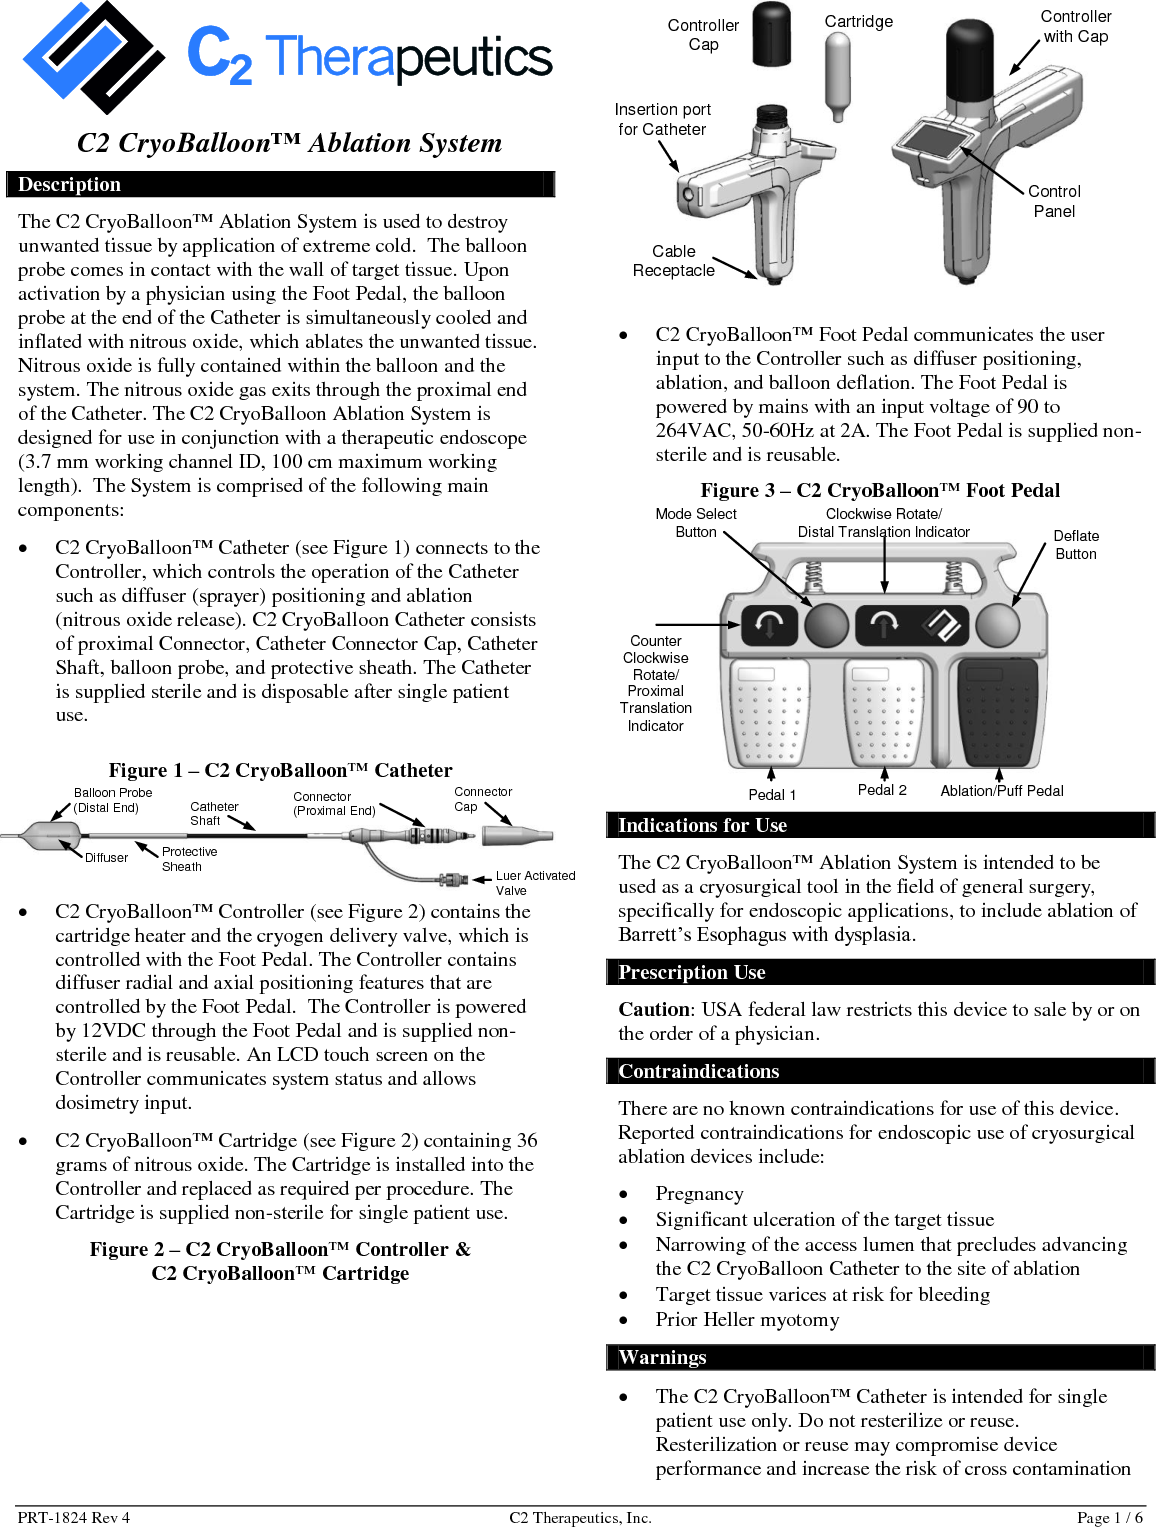 PRT-1824 Rev 4  C2 Therapeutics, Inc.  Page 1 / 6  C2 CryoBalloon™ Ablation System Description The C2 CryoBalloon™ Ablation System is used to destroy unwanted tissue by application of extreme cold.  The balloon probe comes in contact with the wall of target tissue. Upon activation by a physician using the Foot Pedal, the balloon probe at the end of the Catheter is simultaneously cooled and inflated with nitrous oxide, which ablates the unwanted tissue. Nitrous oxide is fully contained within the balloon and the system. The nitrous oxide gas exits through the proximal end of the Catheter. The C2 CryoBalloon Ablation System is designed for use in conjunction with a therapeutic endoscope (3.7 mm working channel ID, 100 cm maximum working length).  The System is comprised of the following main components:   C2 CryoBalloon™ Catheter (see Figure 1) connects to the Controller, which controls the operation of the Catheter such as diffuser (sprayer) positioning and ablation (nitrous oxide release). C2 CryoBalloon Catheter consists of proximal Connector, Catheter Connector Cap, Catheter Shaft, balloon probe, and protective sheath. The Catheter is supplied sterile and is disposable after single patient use. Figure 1 – C2 CryoBalloon™ Catheter   C2 CryoBalloon™ Controller (see Figure 2) contains the cartridge heater and the cryogen delivery valve, which is controlled with the Foot Pedal. The Controller contains diffuser radial and axial positioning features that are controlled by the Foot Pedal.  The Controller is powered by 12VDC through the Foot Pedal and is supplied non-sterile and is reusable. An LCD touch screen on the Controller communicates system status and allows dosimetry input.    C2 CryoBalloon™ Cartridge (see Figure 2) containing 36 grams of nitrous oxide. The Cartridge is installed into the Controller and replaced as required per procedure. The Cartridge is supplied non-sterile for single patient use.  Figure 2 – C2 CryoBalloon™ Controller &amp;  C2 CryoBalloon™ Cartridge                       C2 CryoBalloon™ Foot Pedal communicates the user input to the Controller such as diffuser positioning, ablation, and balloon deflation. The Foot Pedal is powered by mains with an input voltage of 90 to 264VAC, 50-60Hz at 2A. The Foot Pedal is supplied non-sterile and is reusable.  Figure 3 – C2 CryoBalloon™ Foot Pedal   Indications for Use The C2 CryoBalloon™ Ablation System is intended to be used as a cryosurgical tool in the field of general surgery, specifically for endoscopic applications, to include ablation of Barrett’s Esophagus with dysplasia. Prescription Use Caution: USA federal law restricts this device to sale by or on the order of a physician. Contraindications There are no known contraindications for use of this device. Reported contraindications for endoscopic use of cryosurgical ablation devices include:   Pregnancy  Significant ulceration of the target tissue  Narrowing of the access lumen that precludes advancing the C2 CryoBalloon Catheter to the site of ablation  Target tissue varices at risk for bleeding  Prior Heller myotomy Warnings  The C2 CryoBalloon™ Catheter is intended for single patient use only. Do not resterilize or reuse. Resterilization or reuse may compromise device performance and increase the risk of cross contamination Controller Cap Cartridge Insertion port for Catheter Cable Receptacle Controller with Cap Control Panel  Mode Select Button Deflate Button Clockwise Rotate/  Distal Translation Indicator Counter Clockwise Rotate/  Proximal Translation Indicator  Ablation/Puff Pedal Pedal 2 Pedal 1 Connector (Proximal End) Luer Activated Valve Connector Cap Catheter Shaft Protective Sheath Balloon Probe  (Distal End) Diffuser 